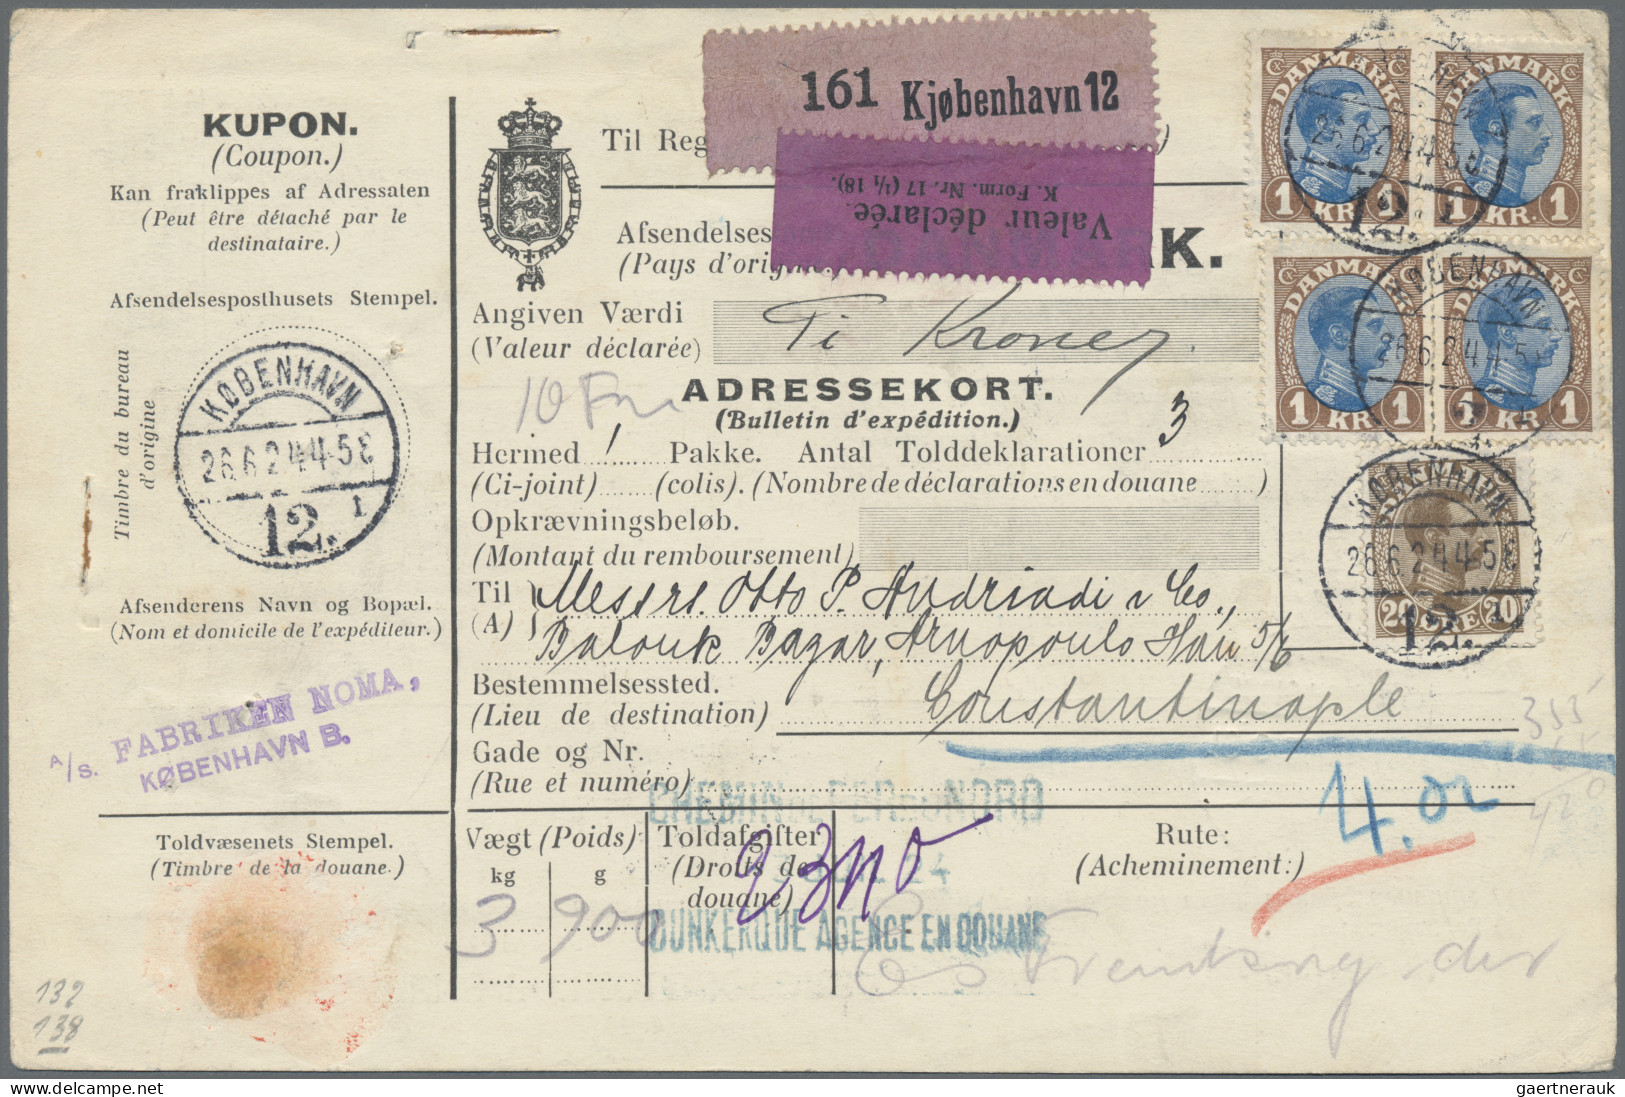 Denmark: 1920/1995, Parcel Depatch Forms/Freight Papers etc., assortment of 50 i